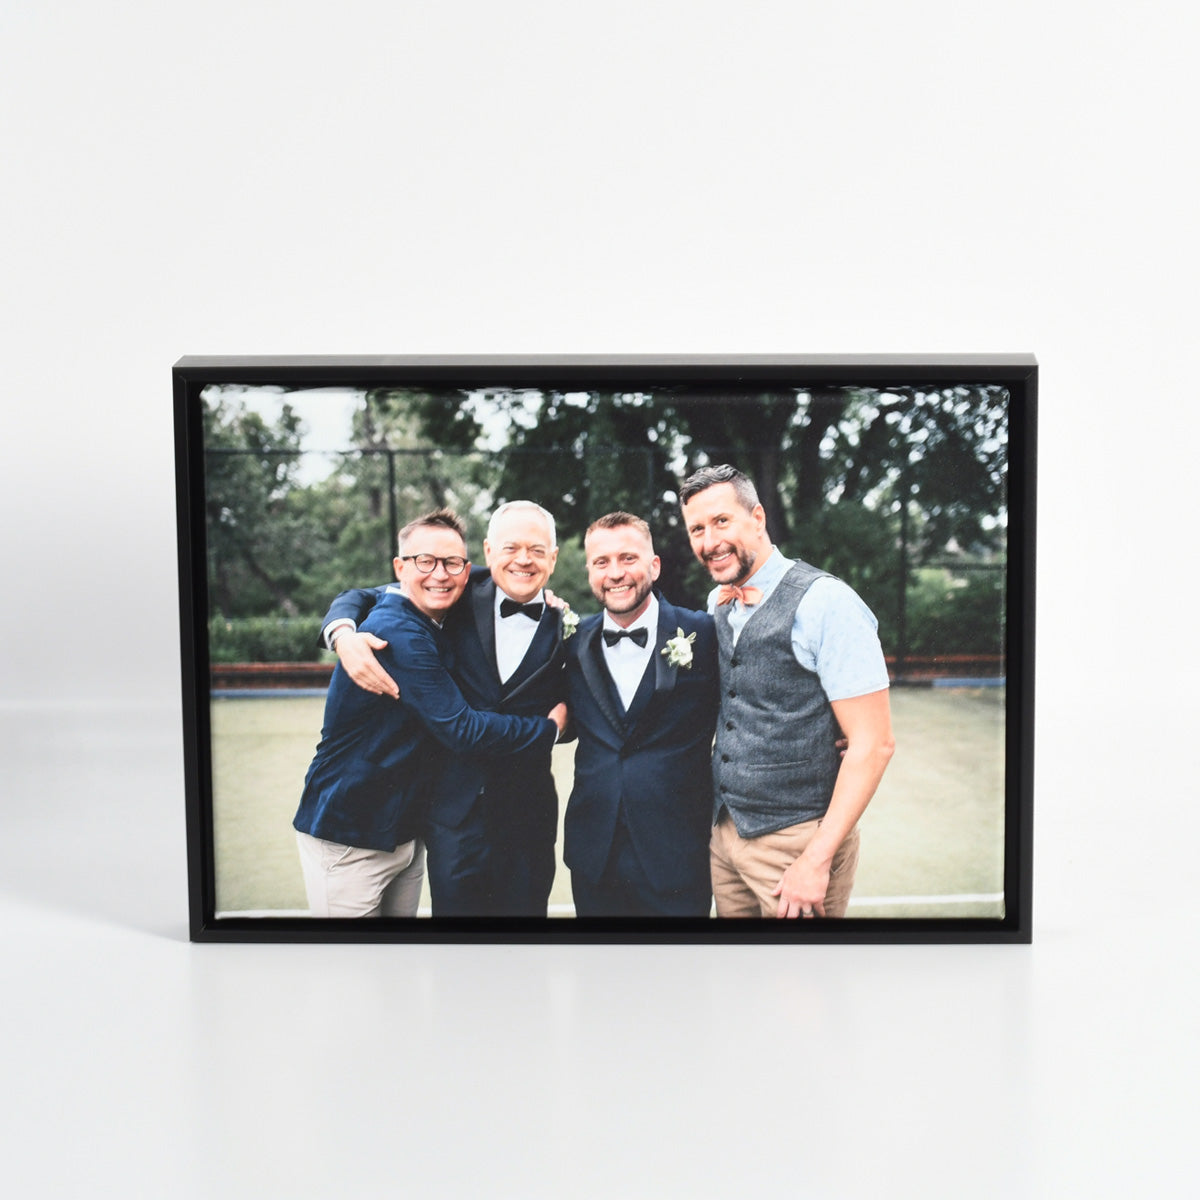 Wedding Photo Printed on Canvas with Custom Floater Frame